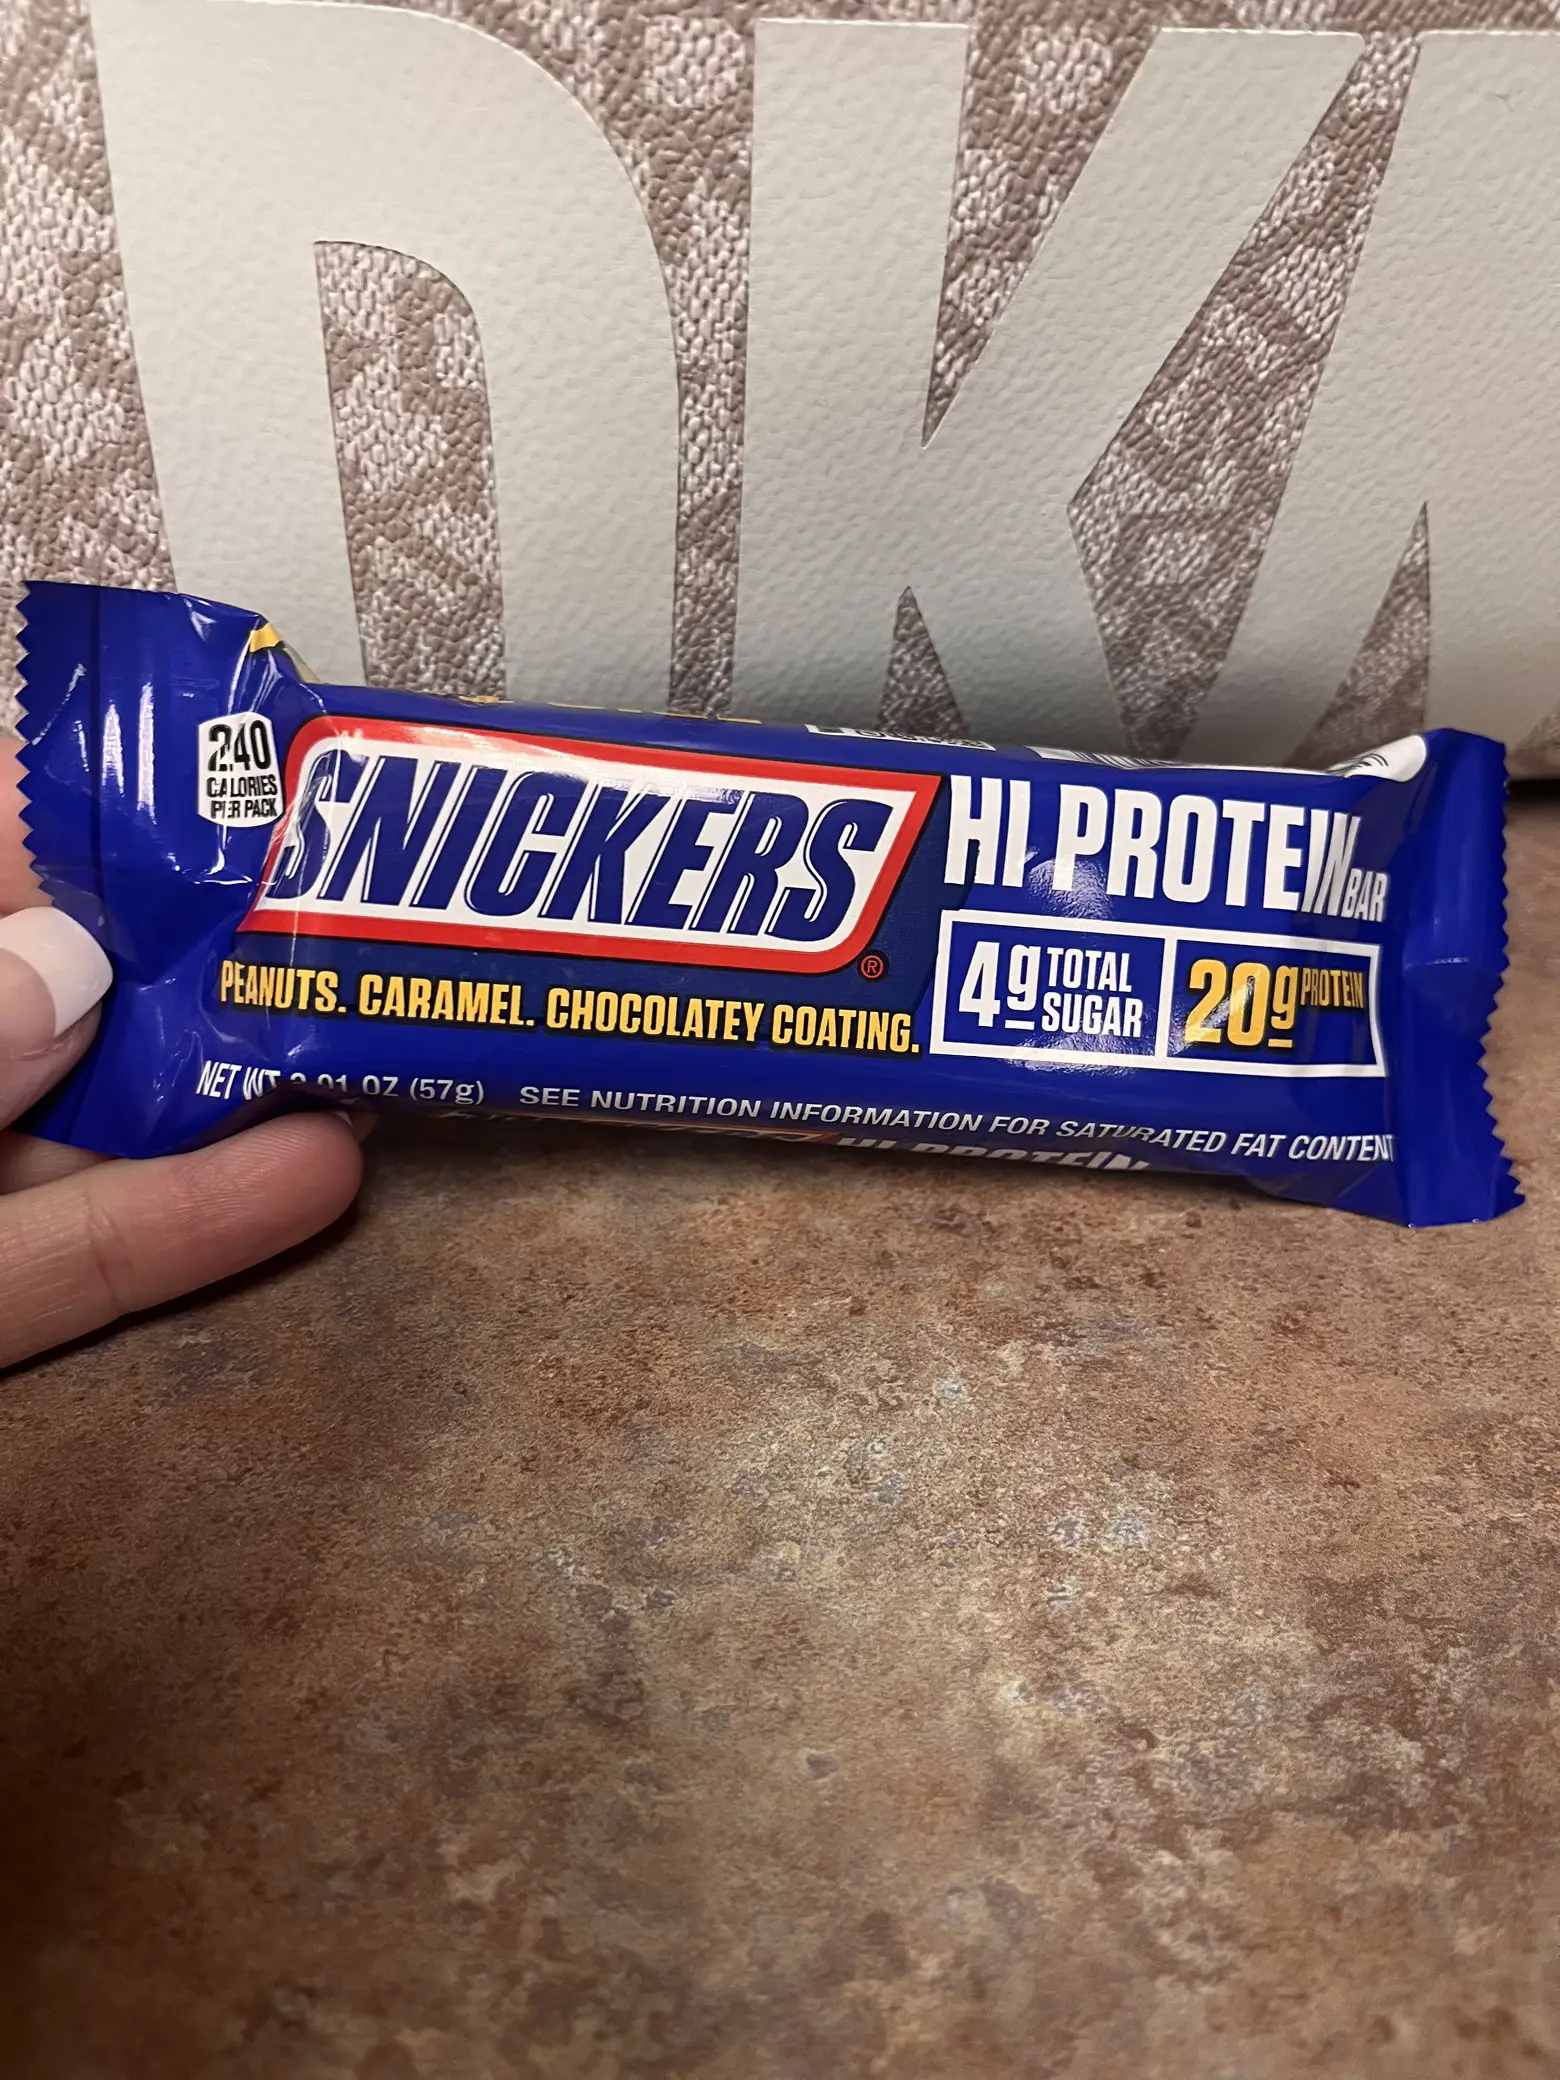 Snickers Berry Whip 15 x 40g – Planet Foods